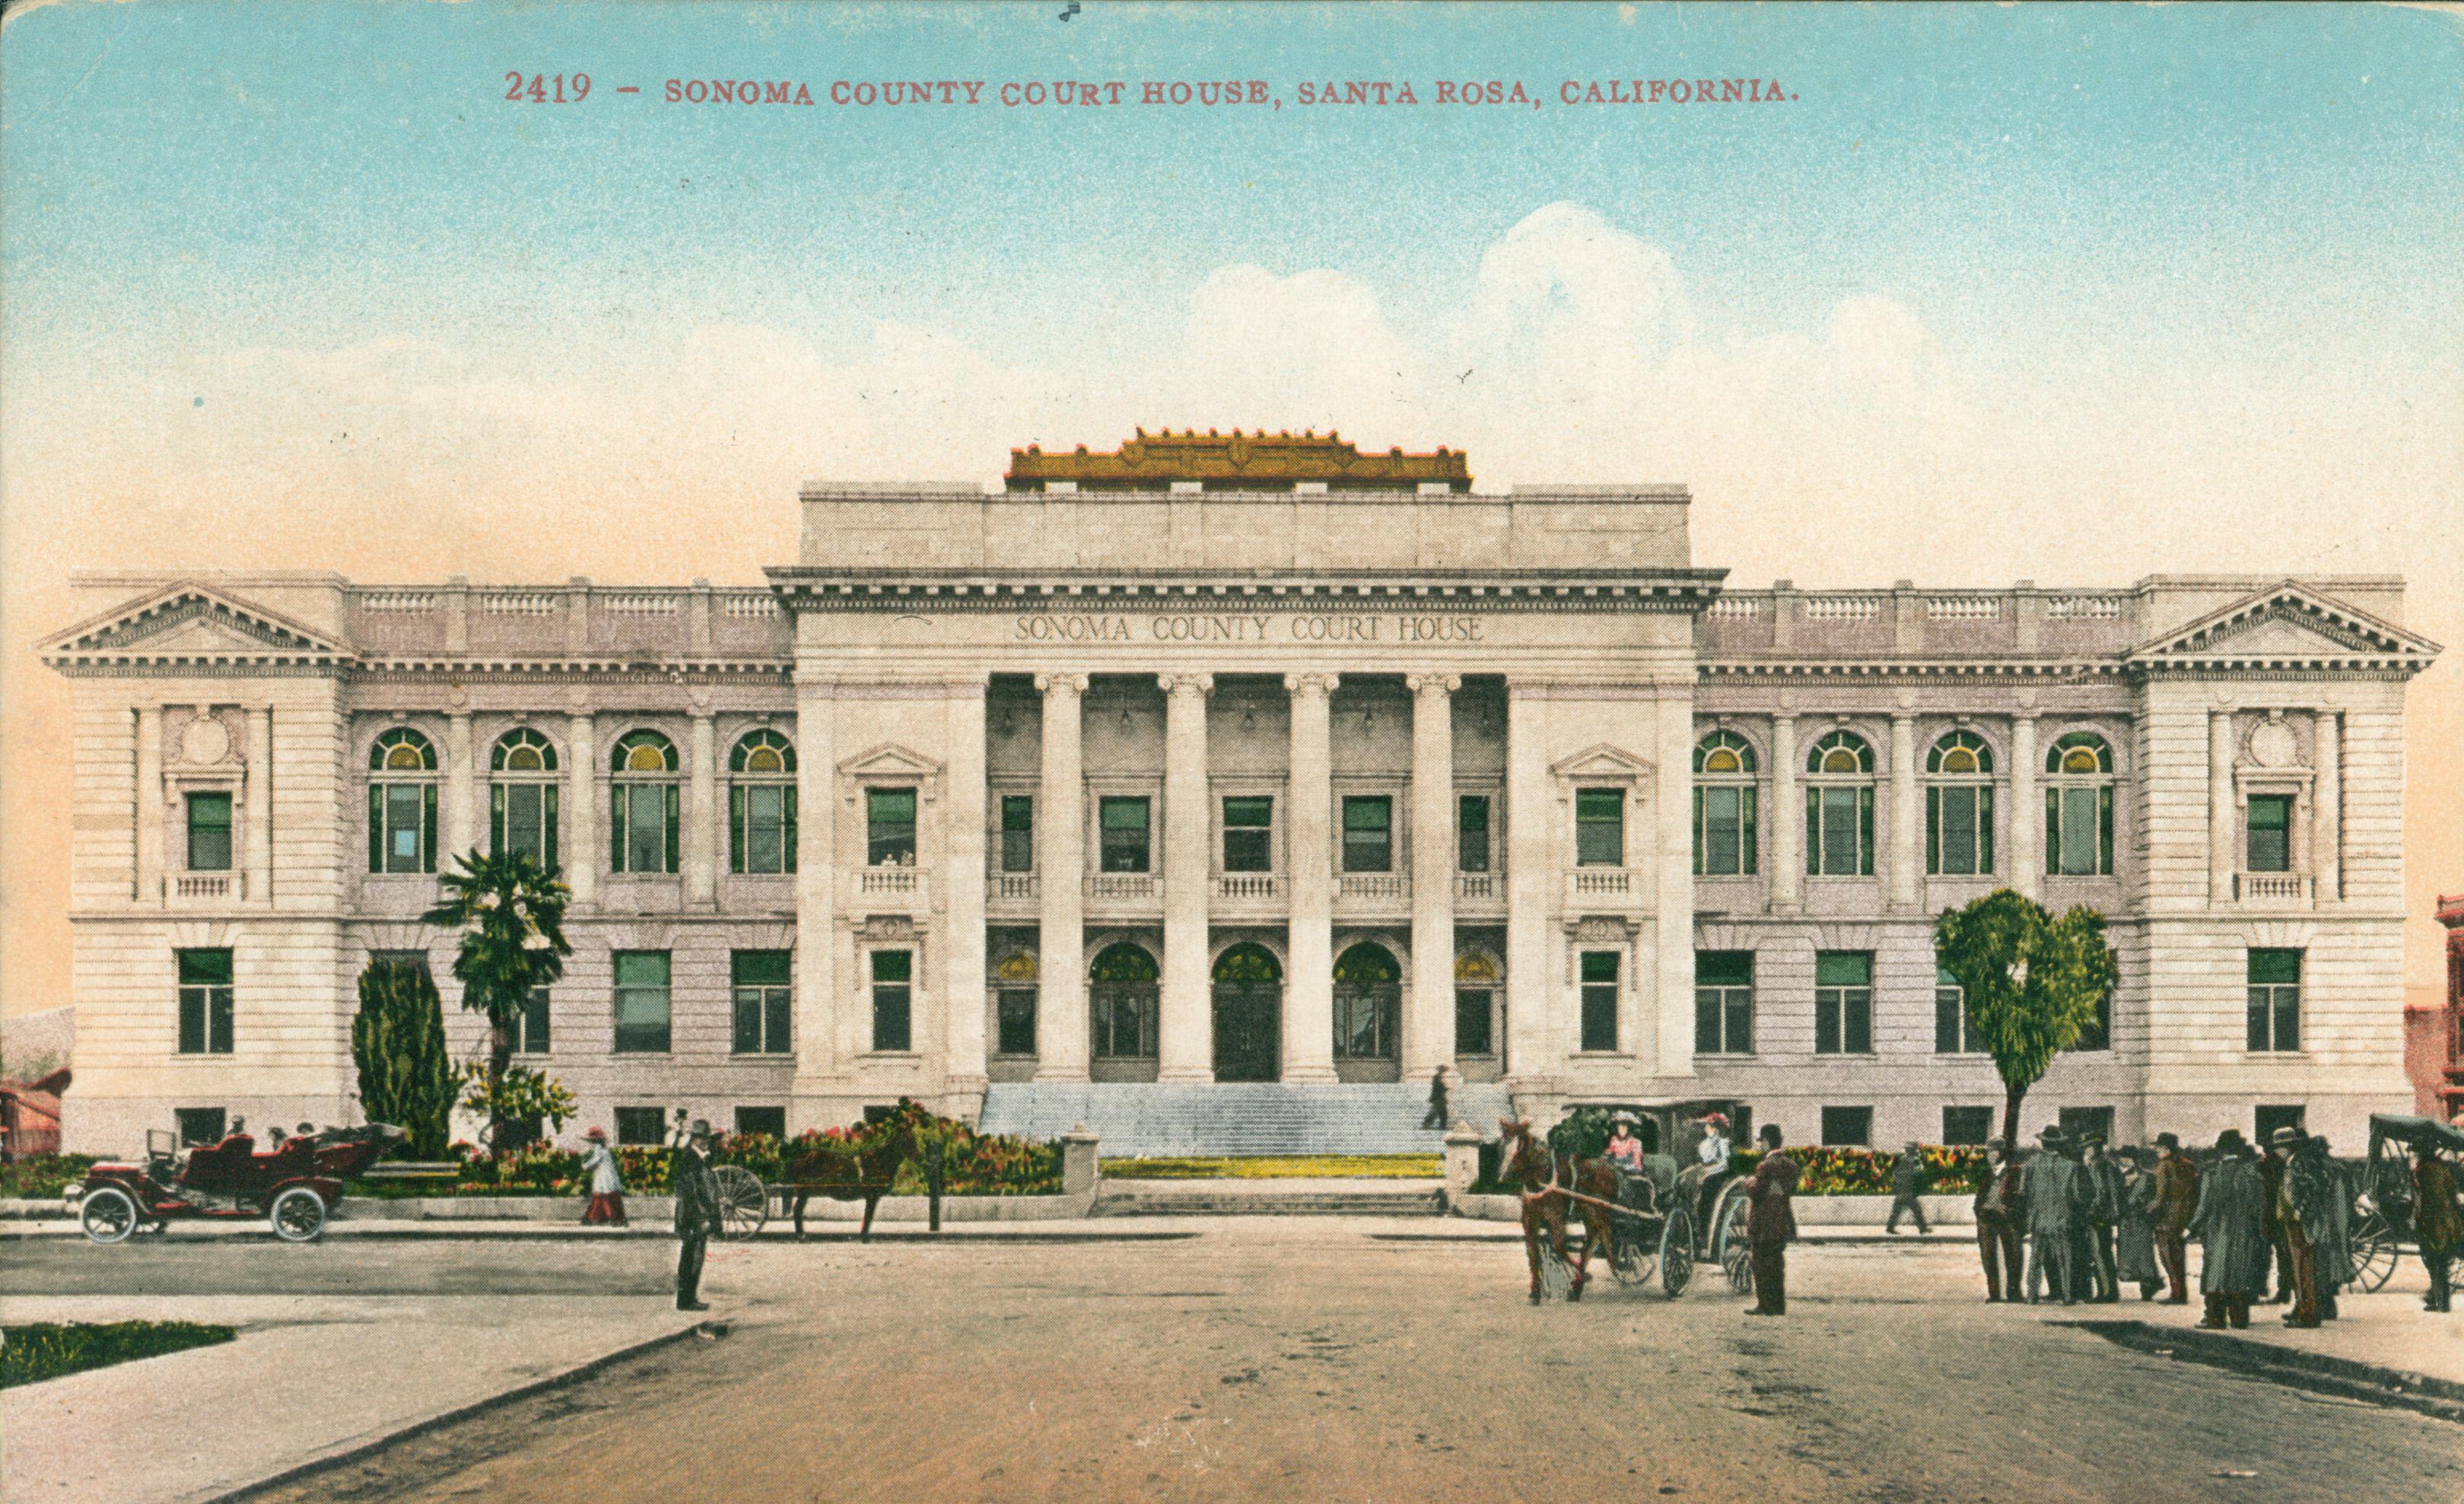 Shows a frontal view of the Santa Rosa courthouse